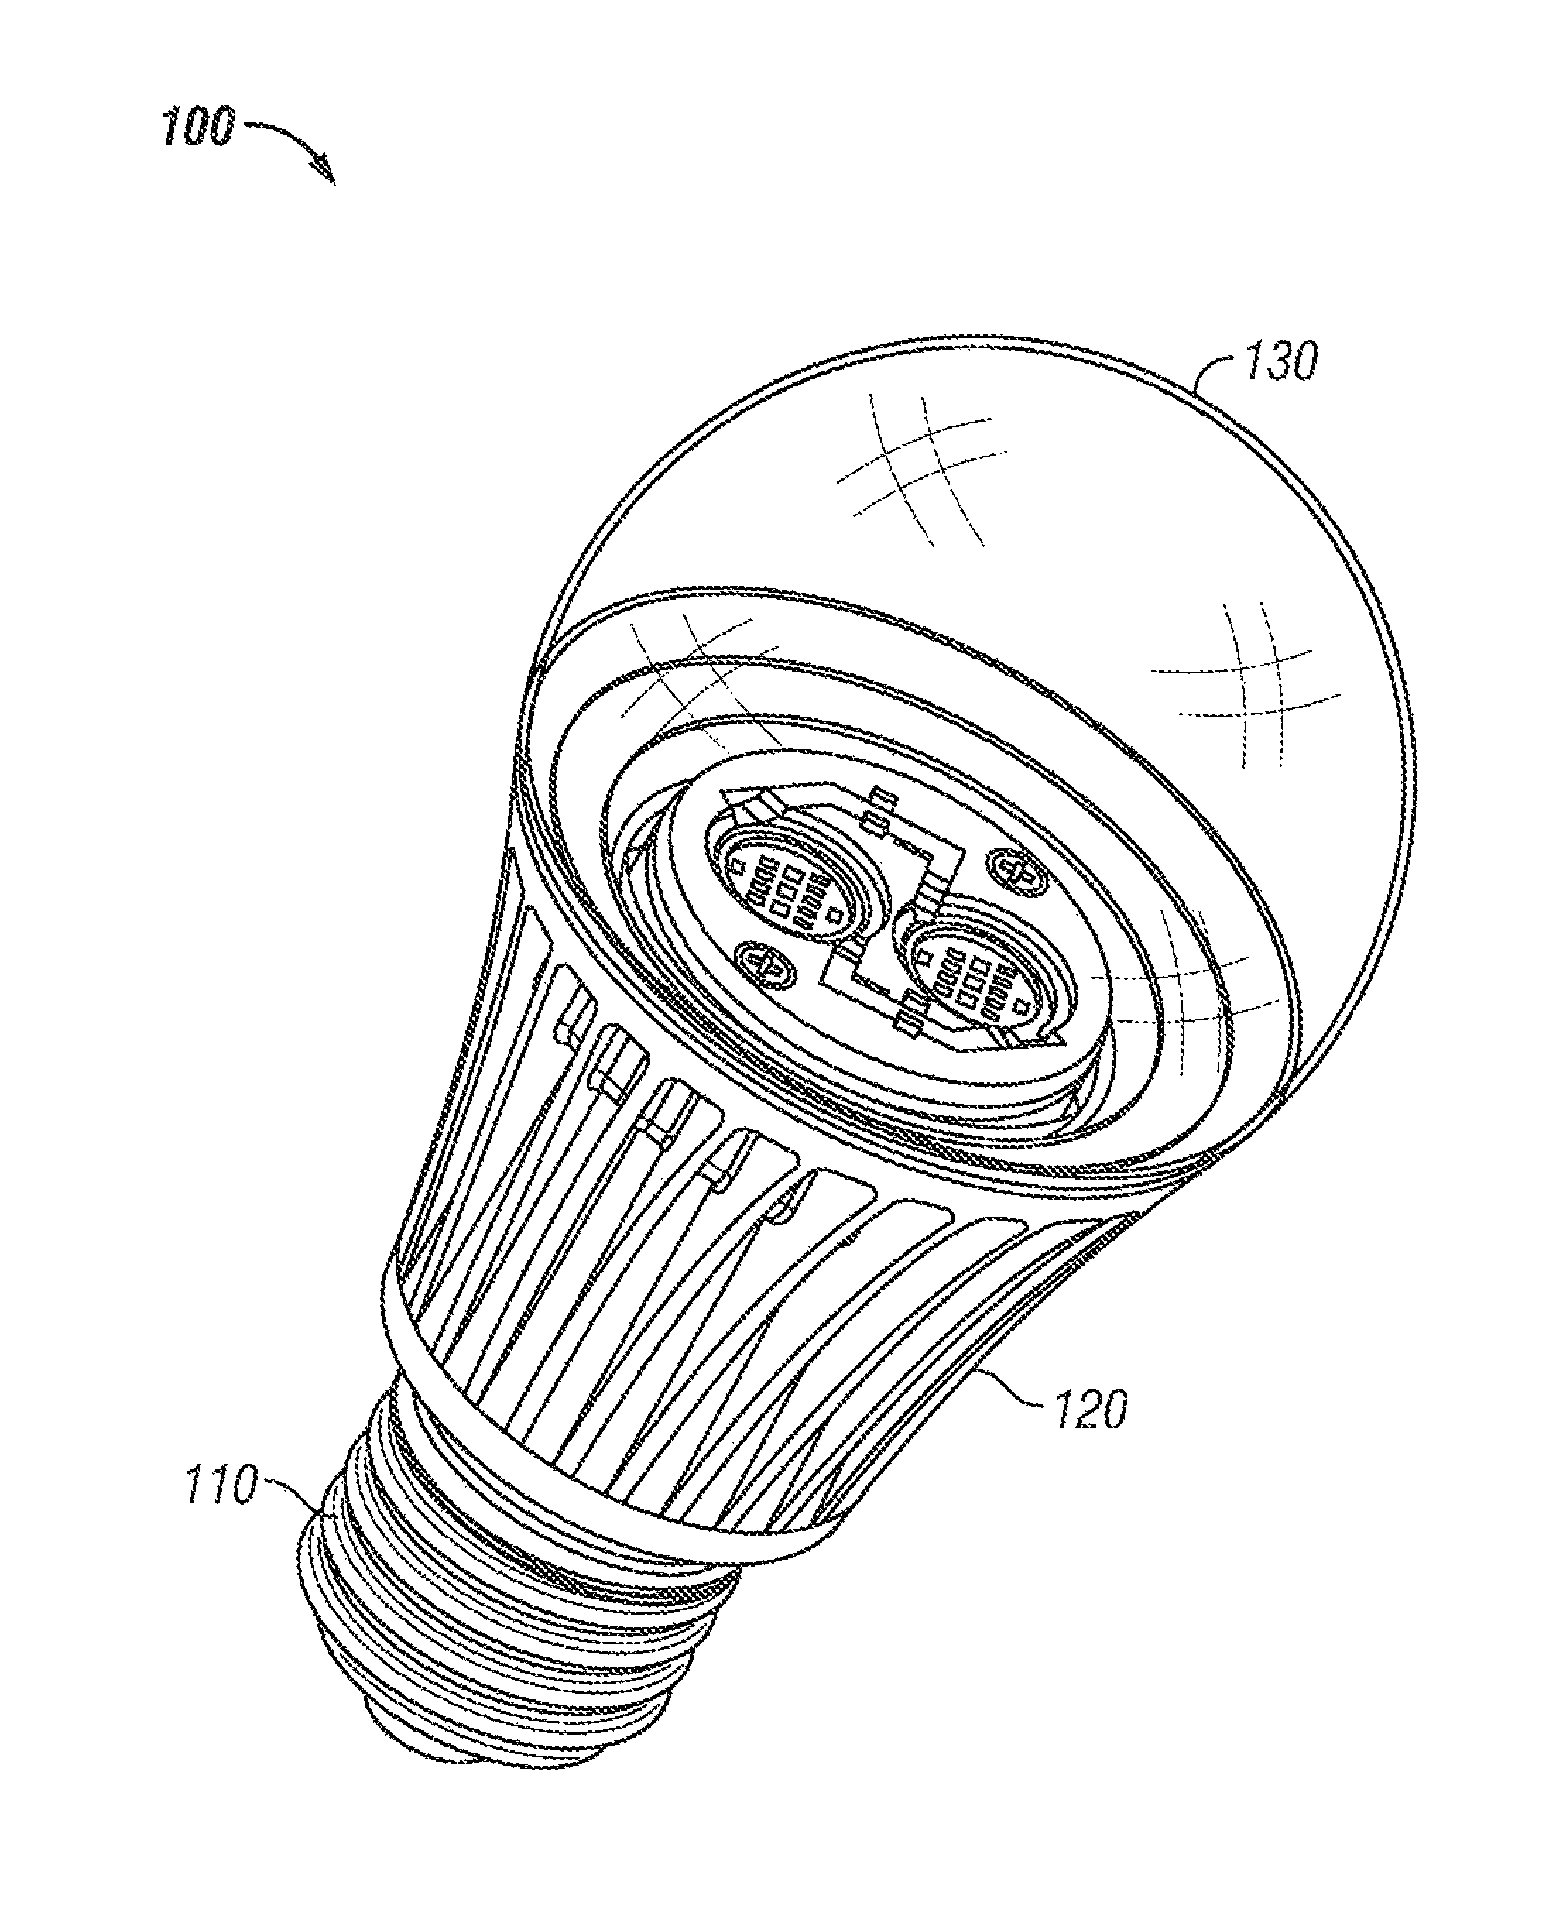 LED lamp for producing biologically-corrected light